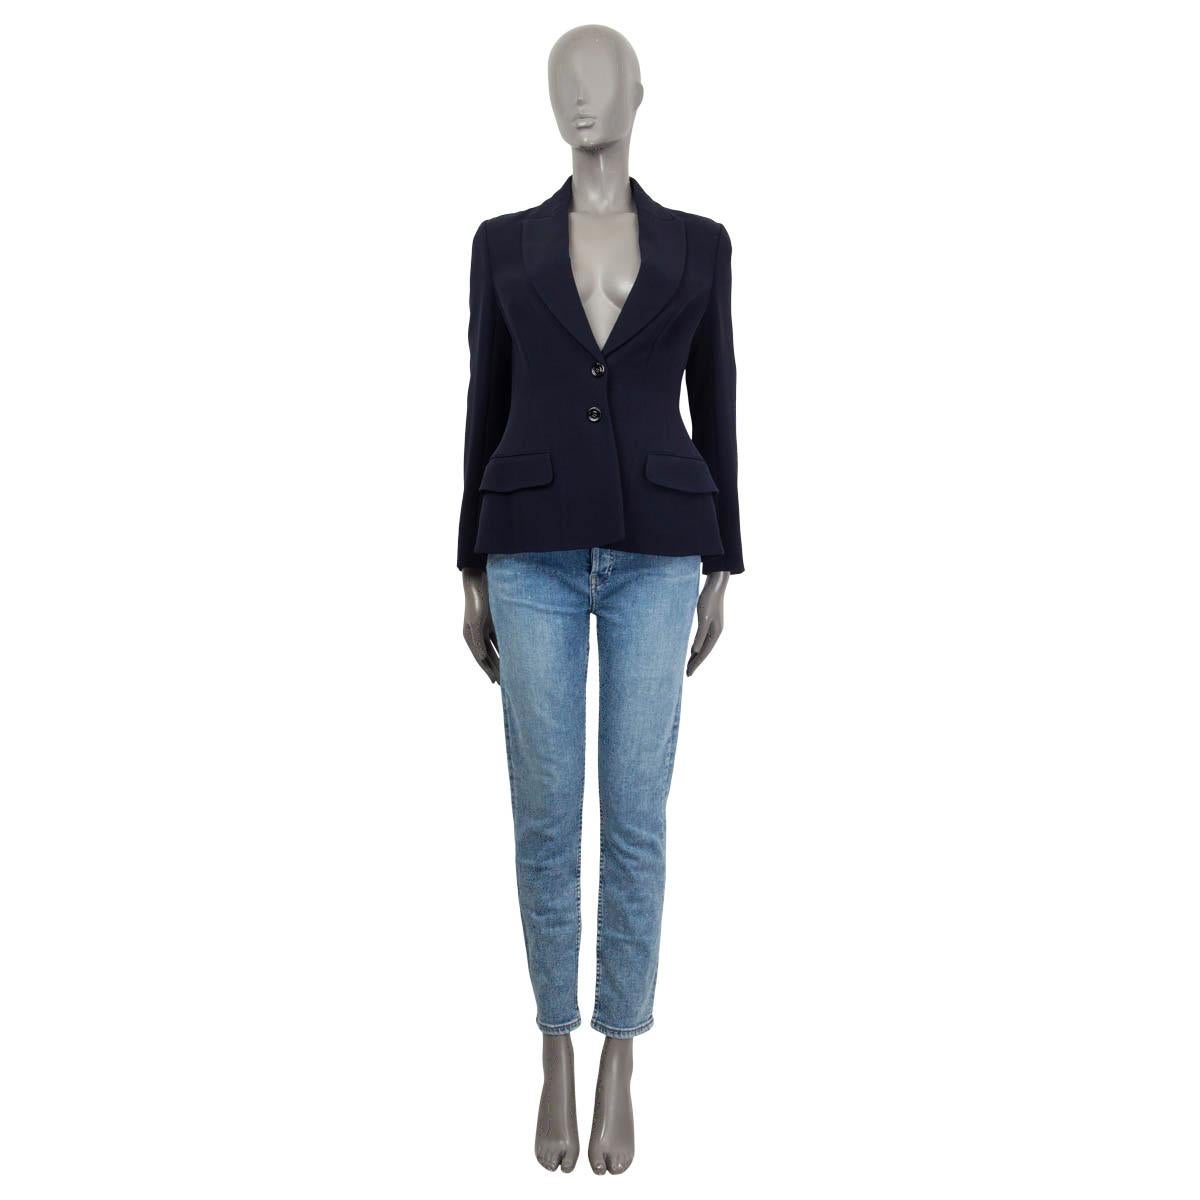 100% authentic Chanel Cruise 2013 classic single breasted blazer in navy blue silk (100%). Features two flap pockets on the front and buttoned cuffs. Opens with two buttons on the front. Semi-lined in black silk (100%). Brand new, with